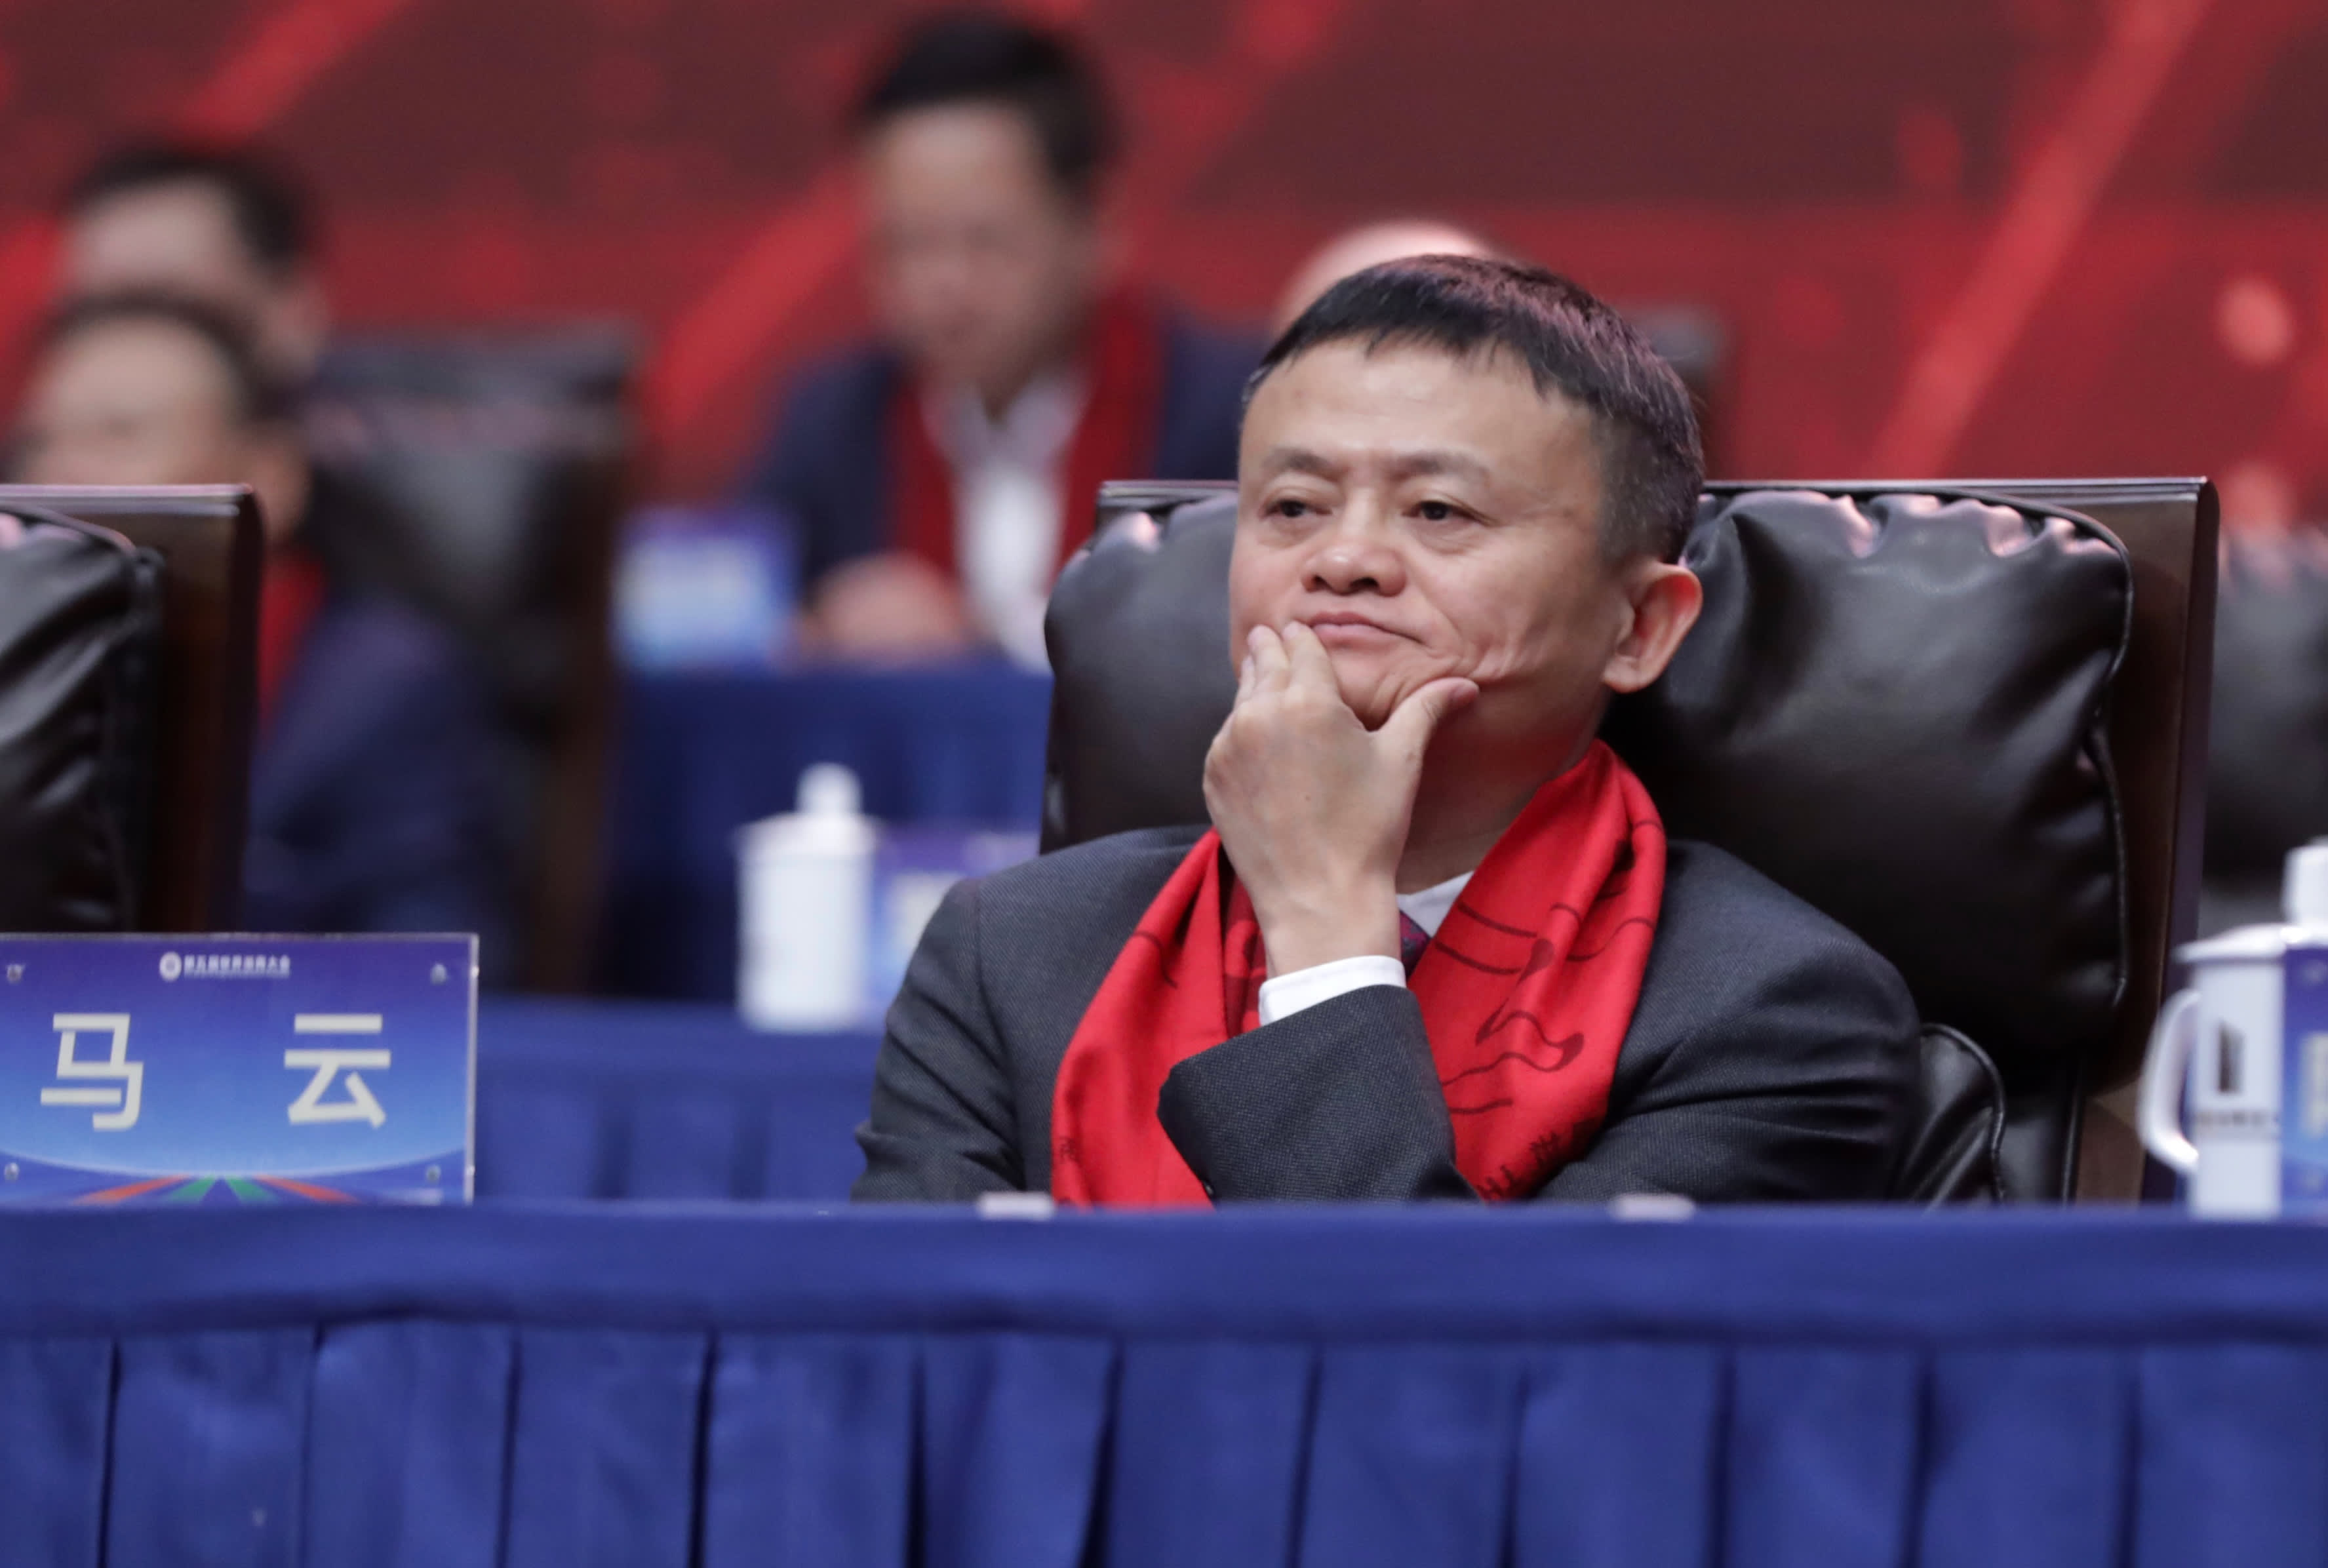 Jack Ma’s tensions with Beijing cast shadow over Alibaba’s future